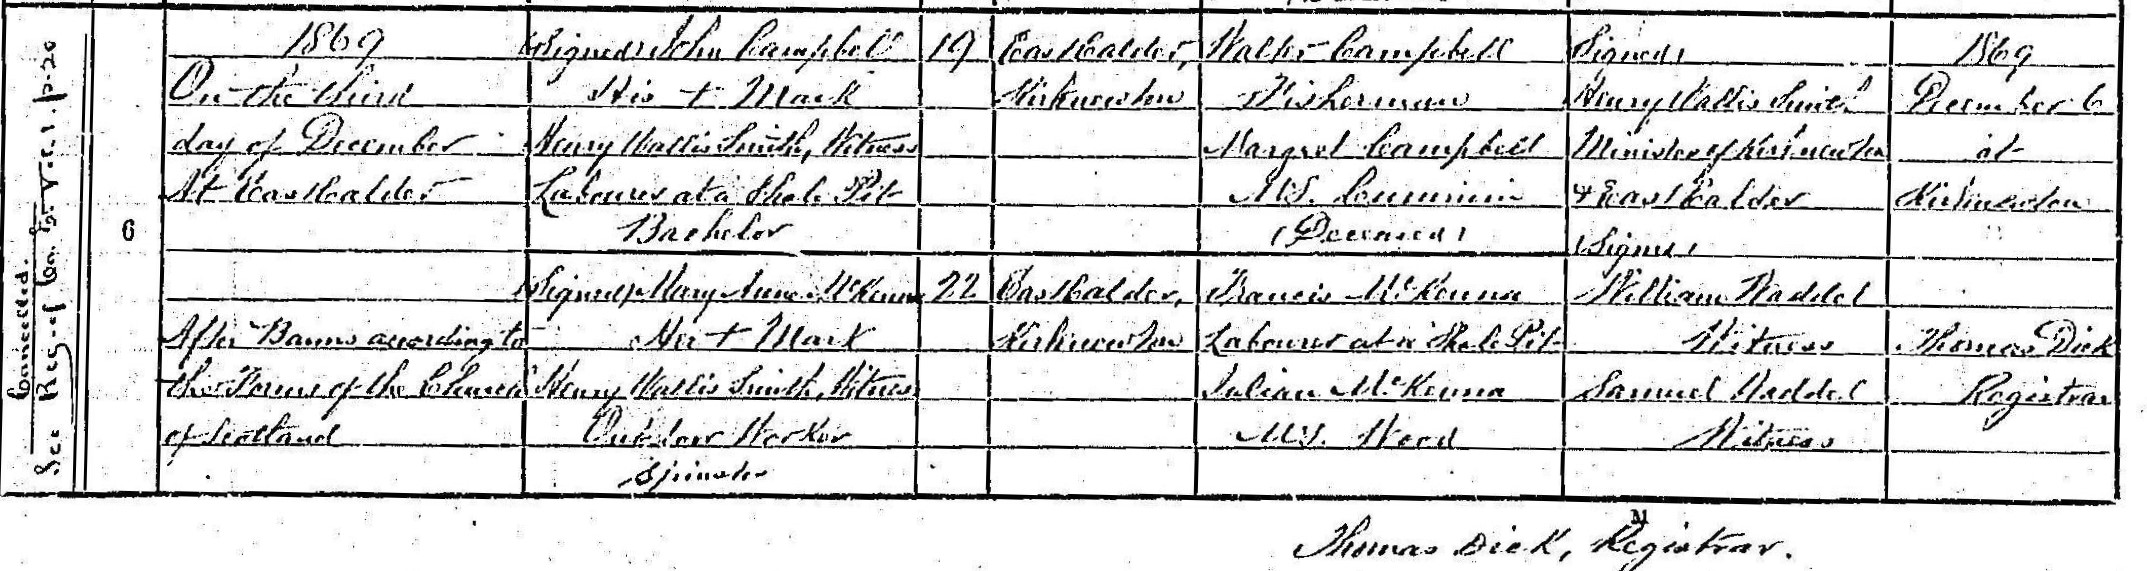 Marriage entry for John Campbell and Mary Ann McKenna in the parish of Kirknewton and East Calder, 1869